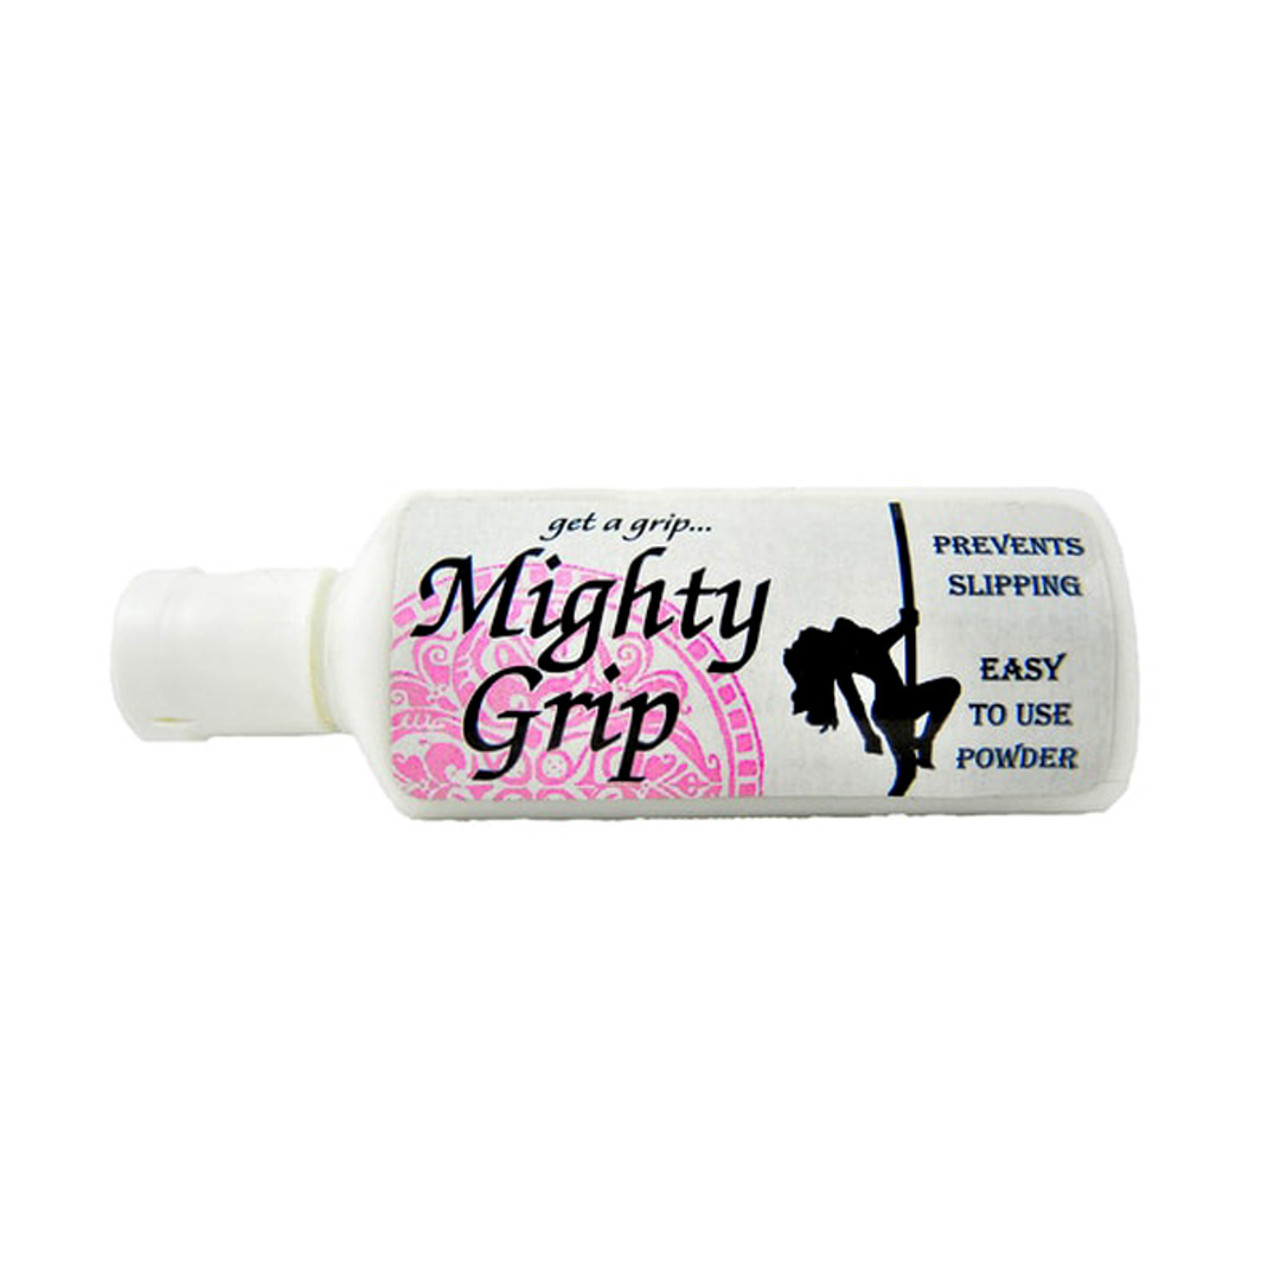 Buy the Mighty Grip Powder for Pole Dancing